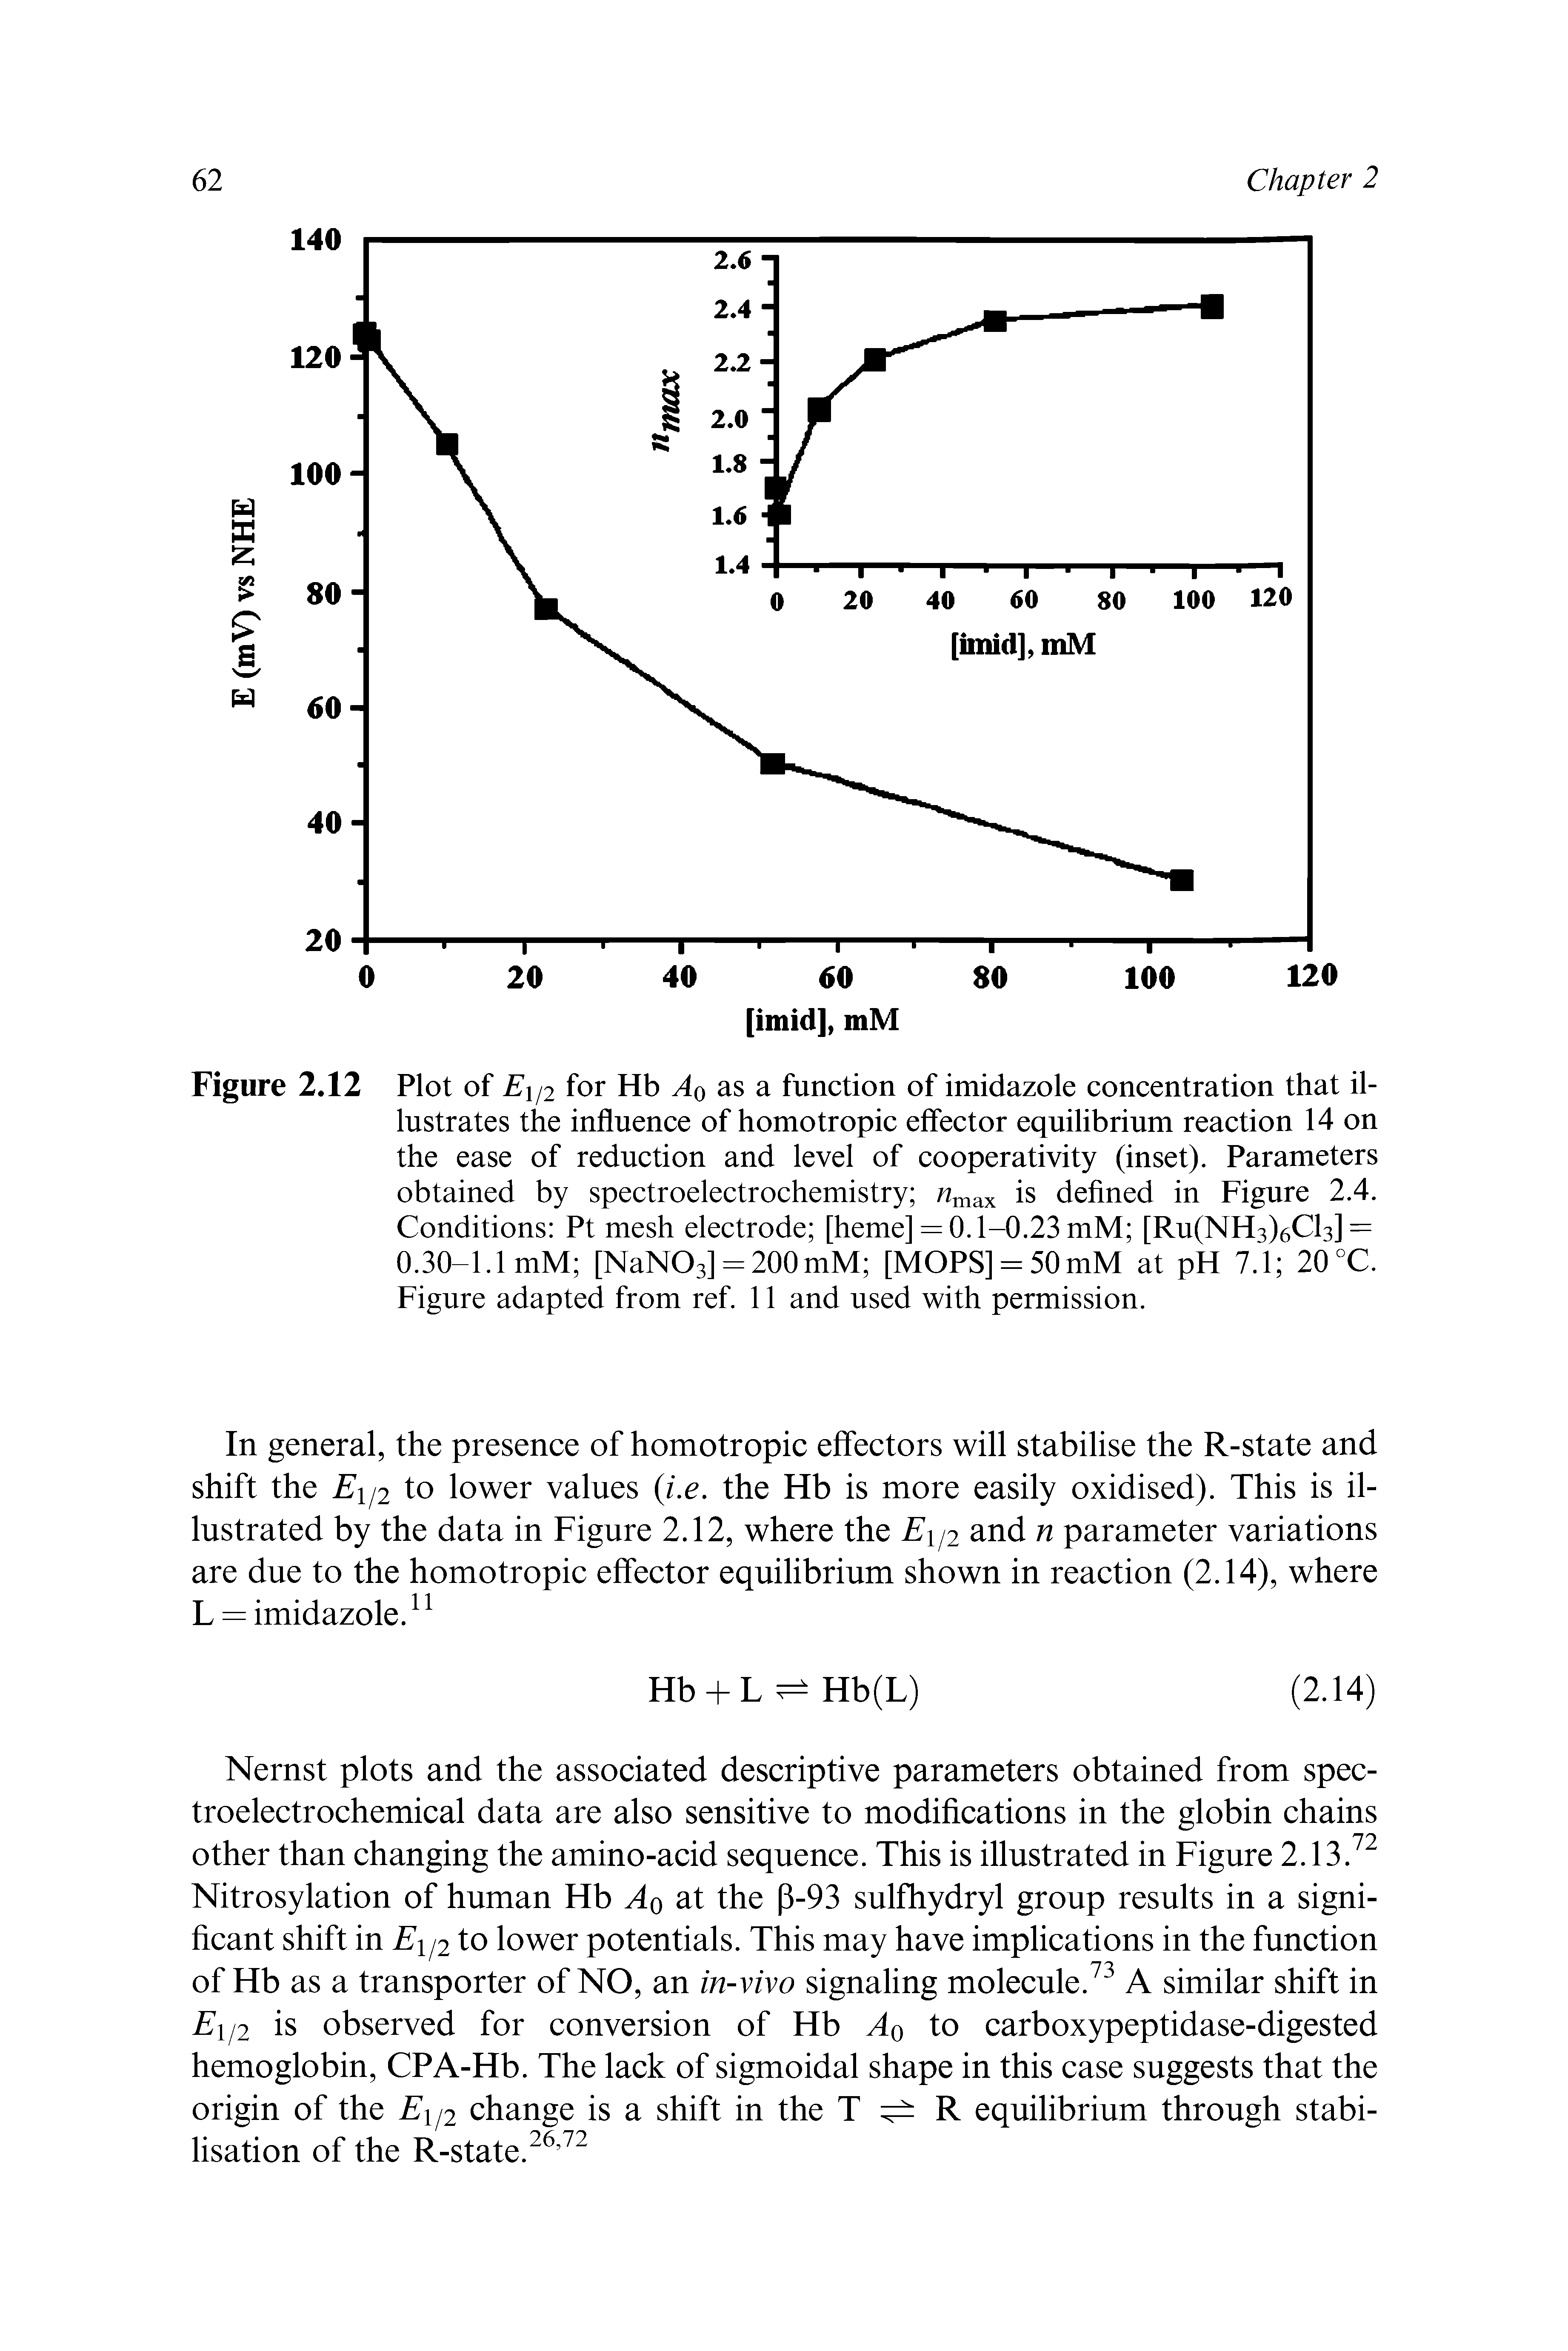 Figure 2.12 Plot of F1/2 for Hb as a function of imidazole concentration that illustrates the influence of homotropic effector equilibrium reaction 14 on the ease of reduetion and level of cooperativity (inset). Parameters obtained by spectroelectrochemistry max is defined in Figure 2.4. Conditions Pt mesh electrode [heme] = 0.1-0.23 mM [Ru(NH3)6Cl3] = 0.30-1.1 mM [NaN03] = 200mM [MOPS] = 50 mM at pH 7.1 20 °C. Figure adapted from ref. 11 and used with permission.